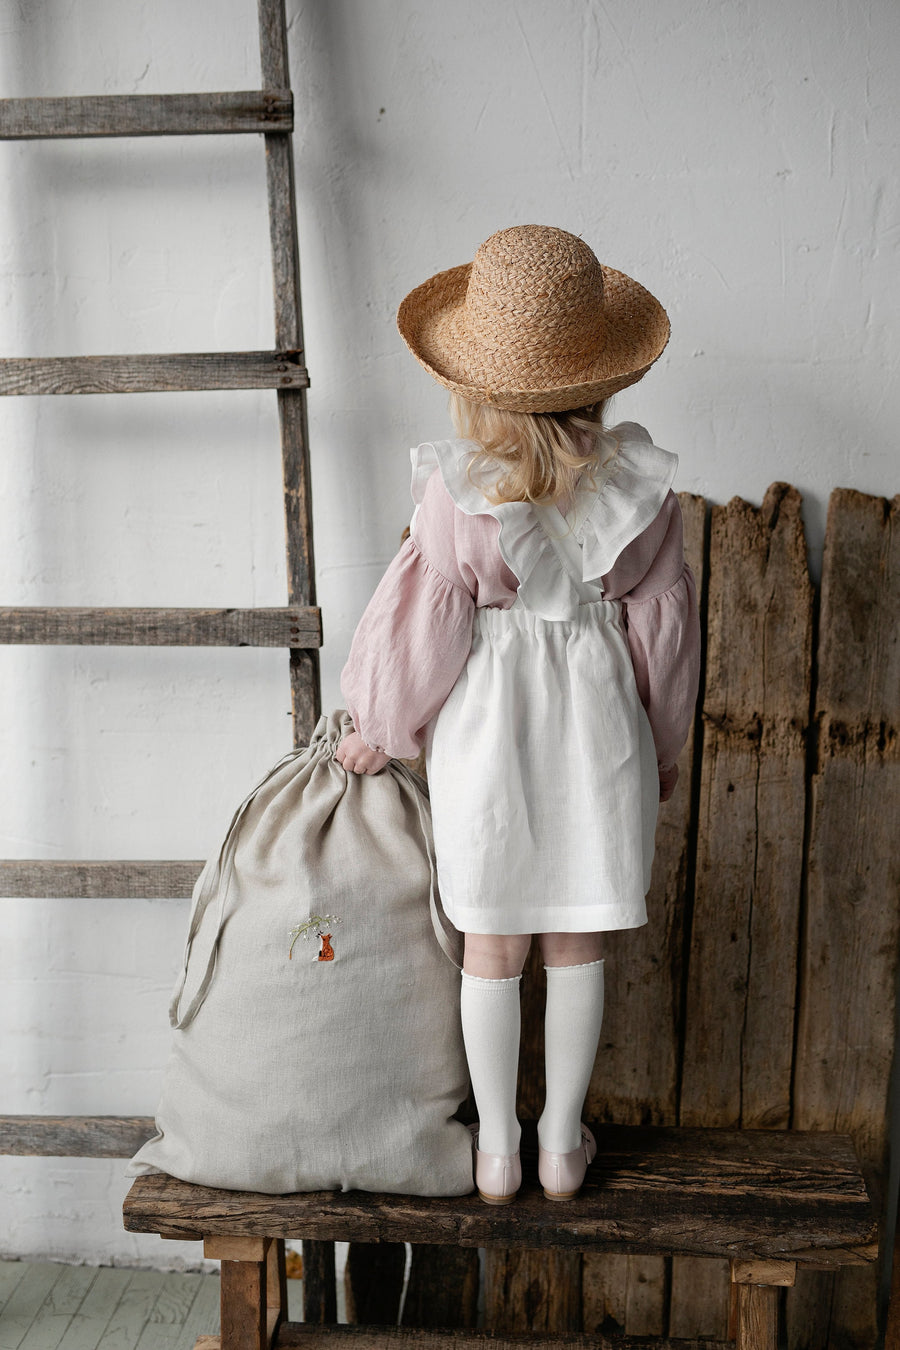 White Cross Back Pinafore with Wings